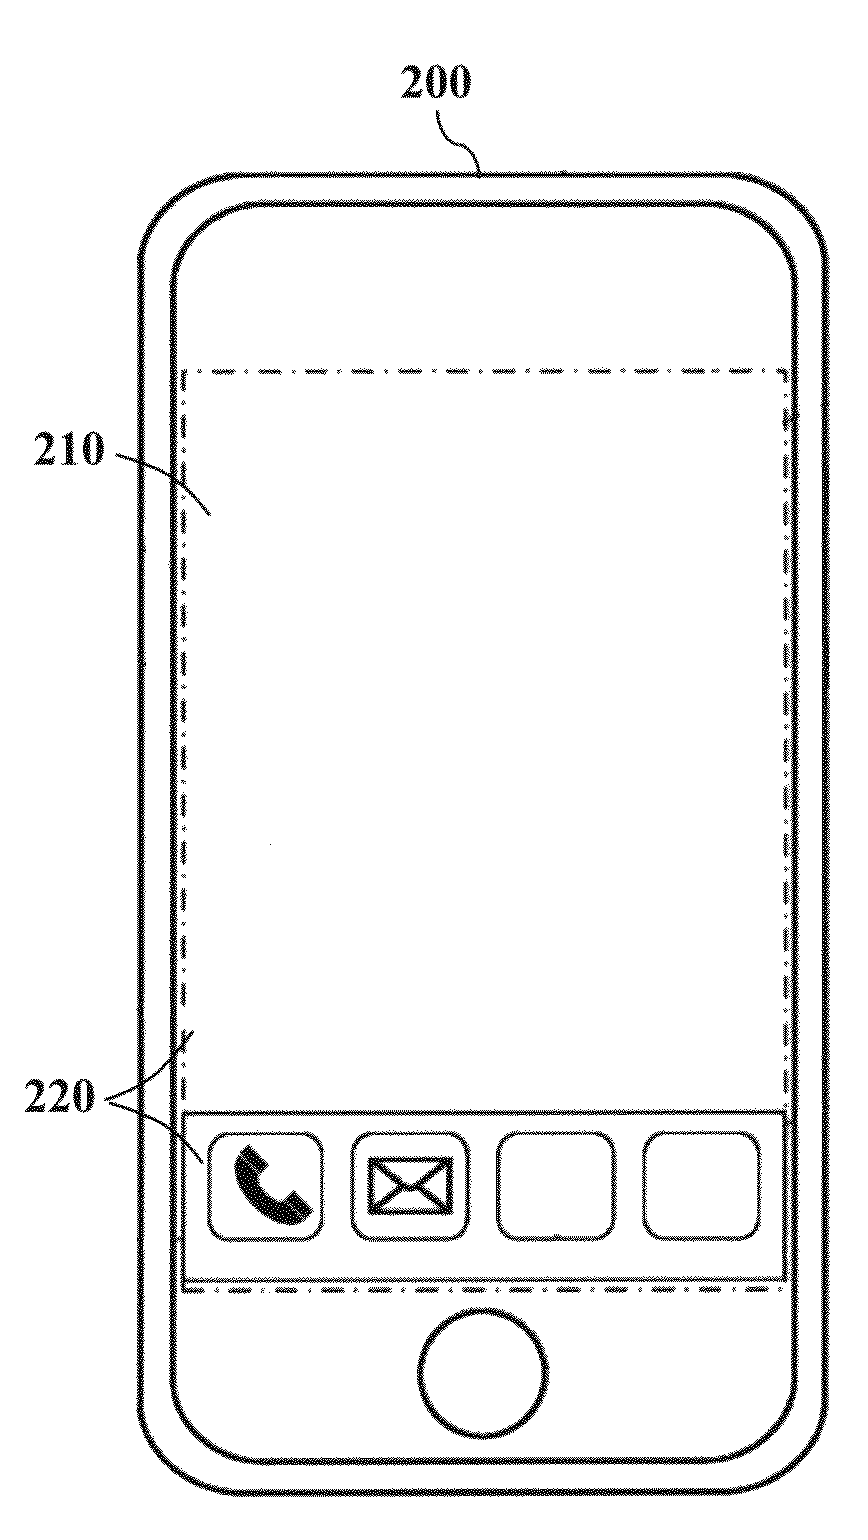 Method and apparatus for performing color-based reaction testing of biological materials